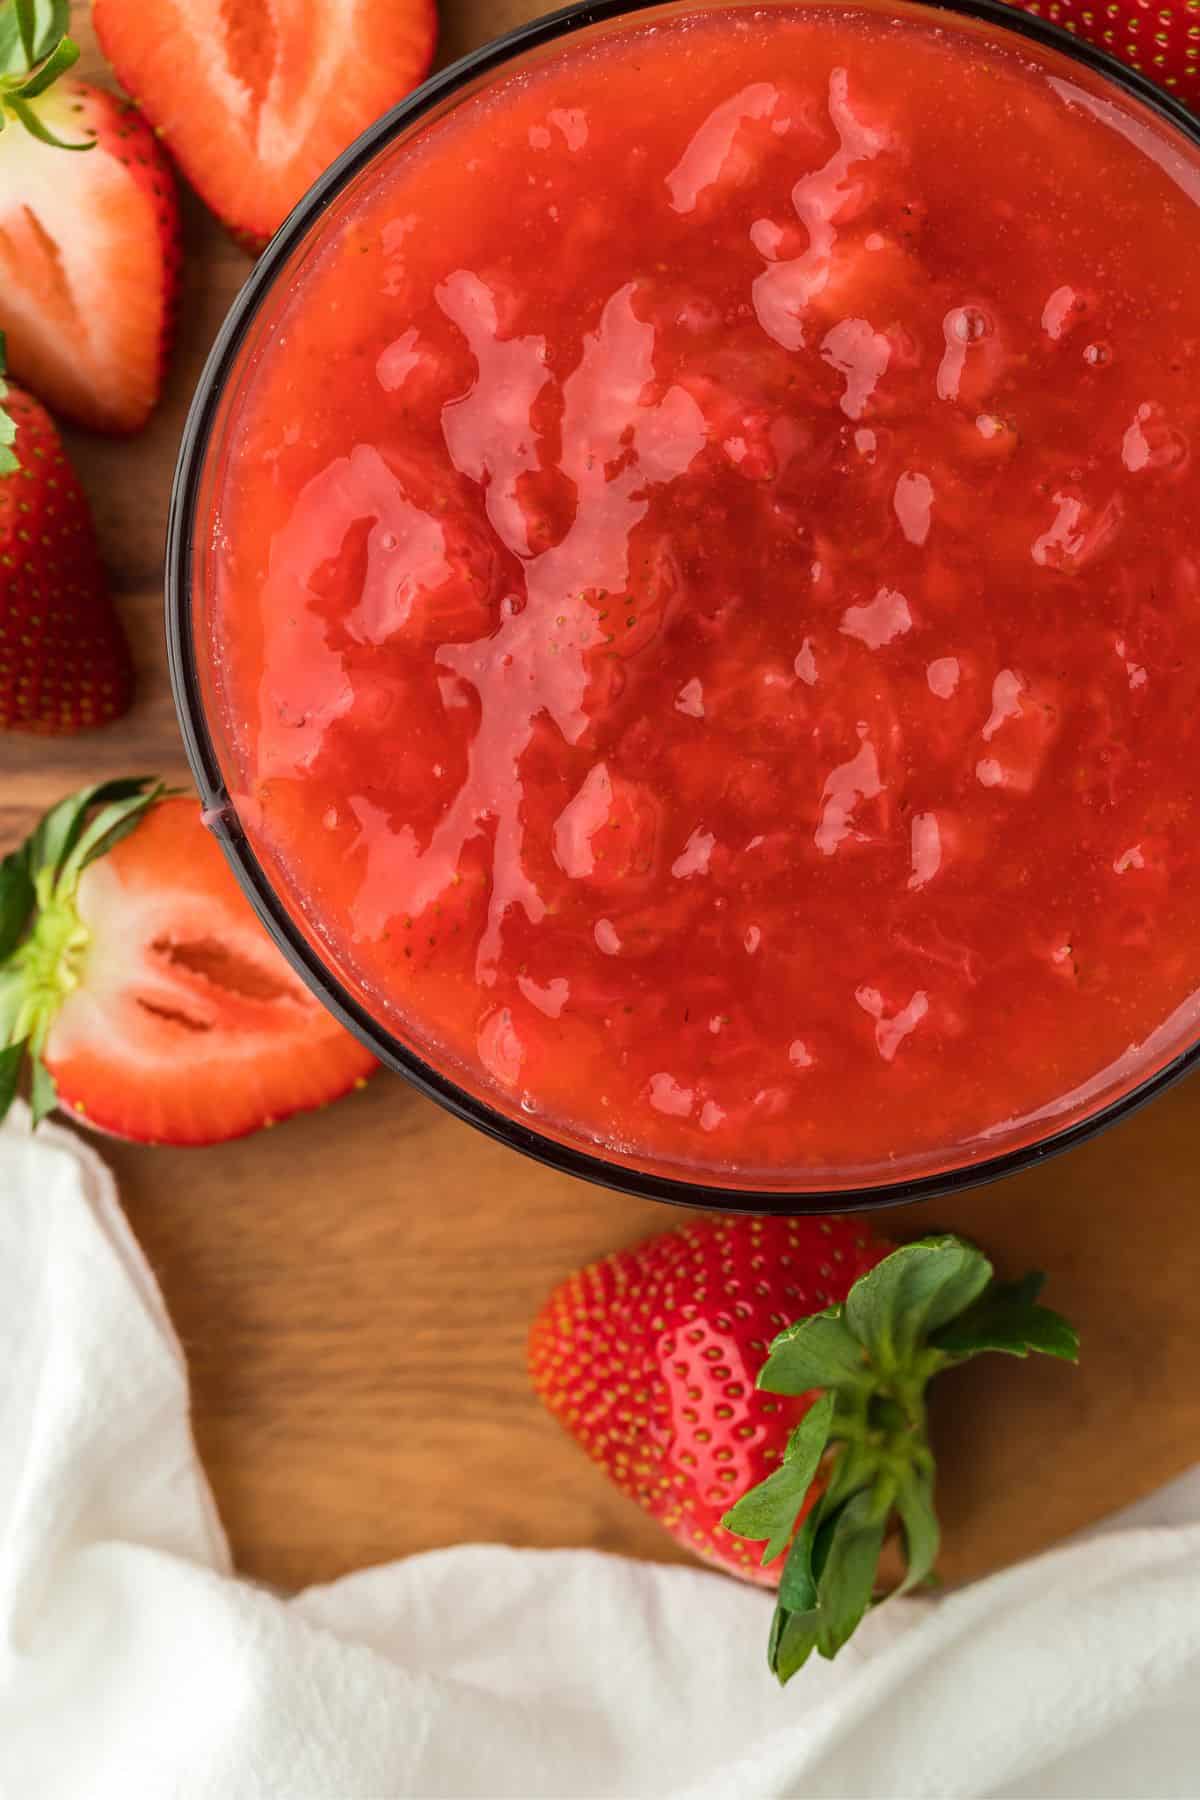 Closeup of a bowl of freshly made strawberry sauce in a wooden board. Surrounding the bowl are several strawberries and a white cloth